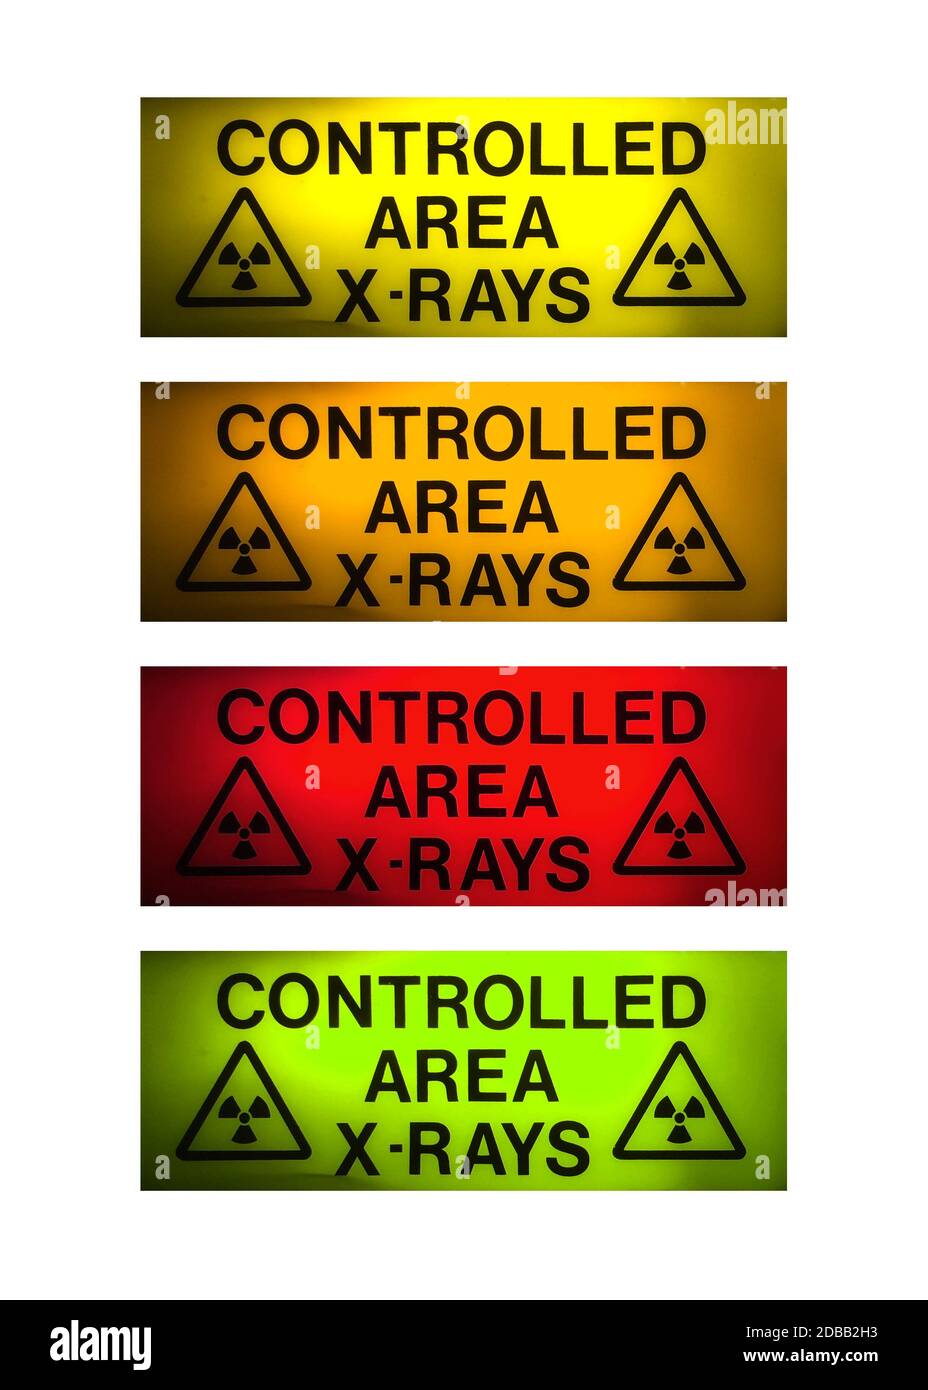 X-Rays sign in 4 different colours isolated on white Stock Photo